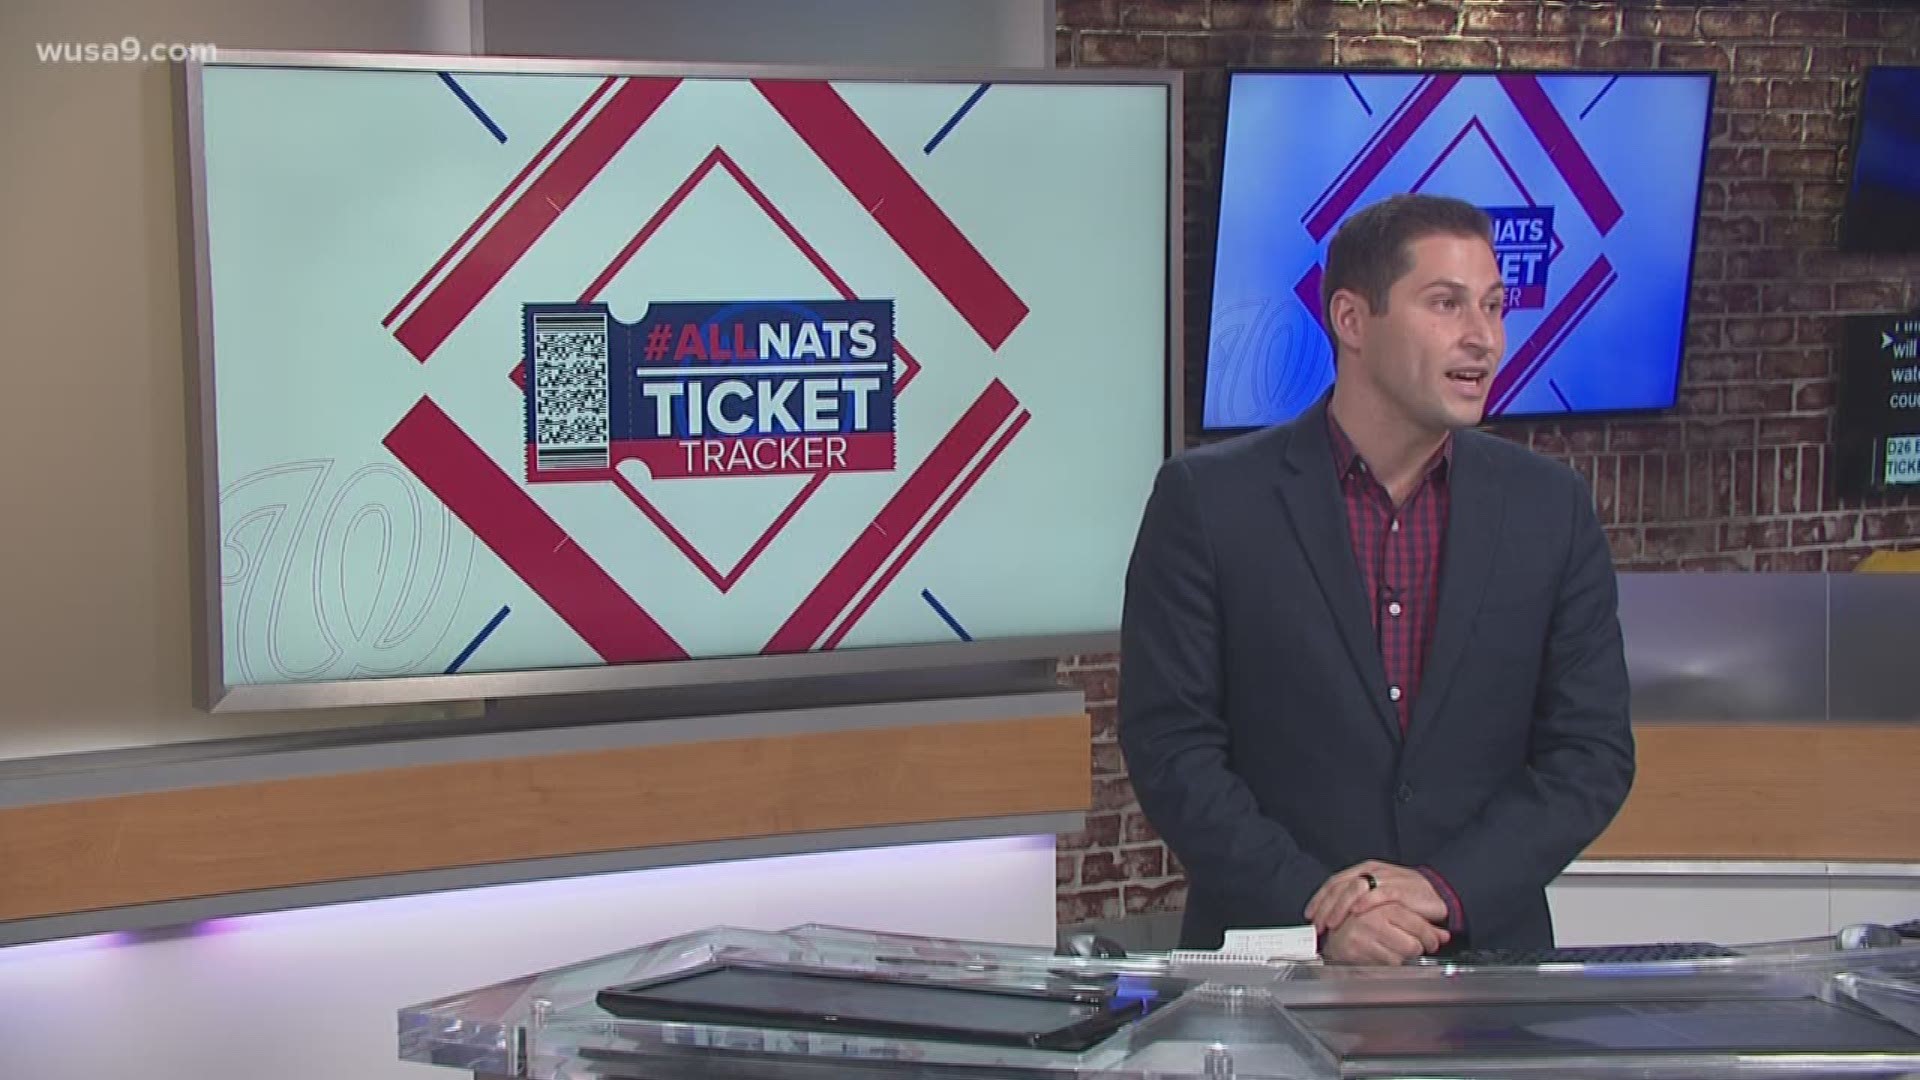 If you're still looking for Nats tickets, we've got a breakdown of World Series ticket prices.